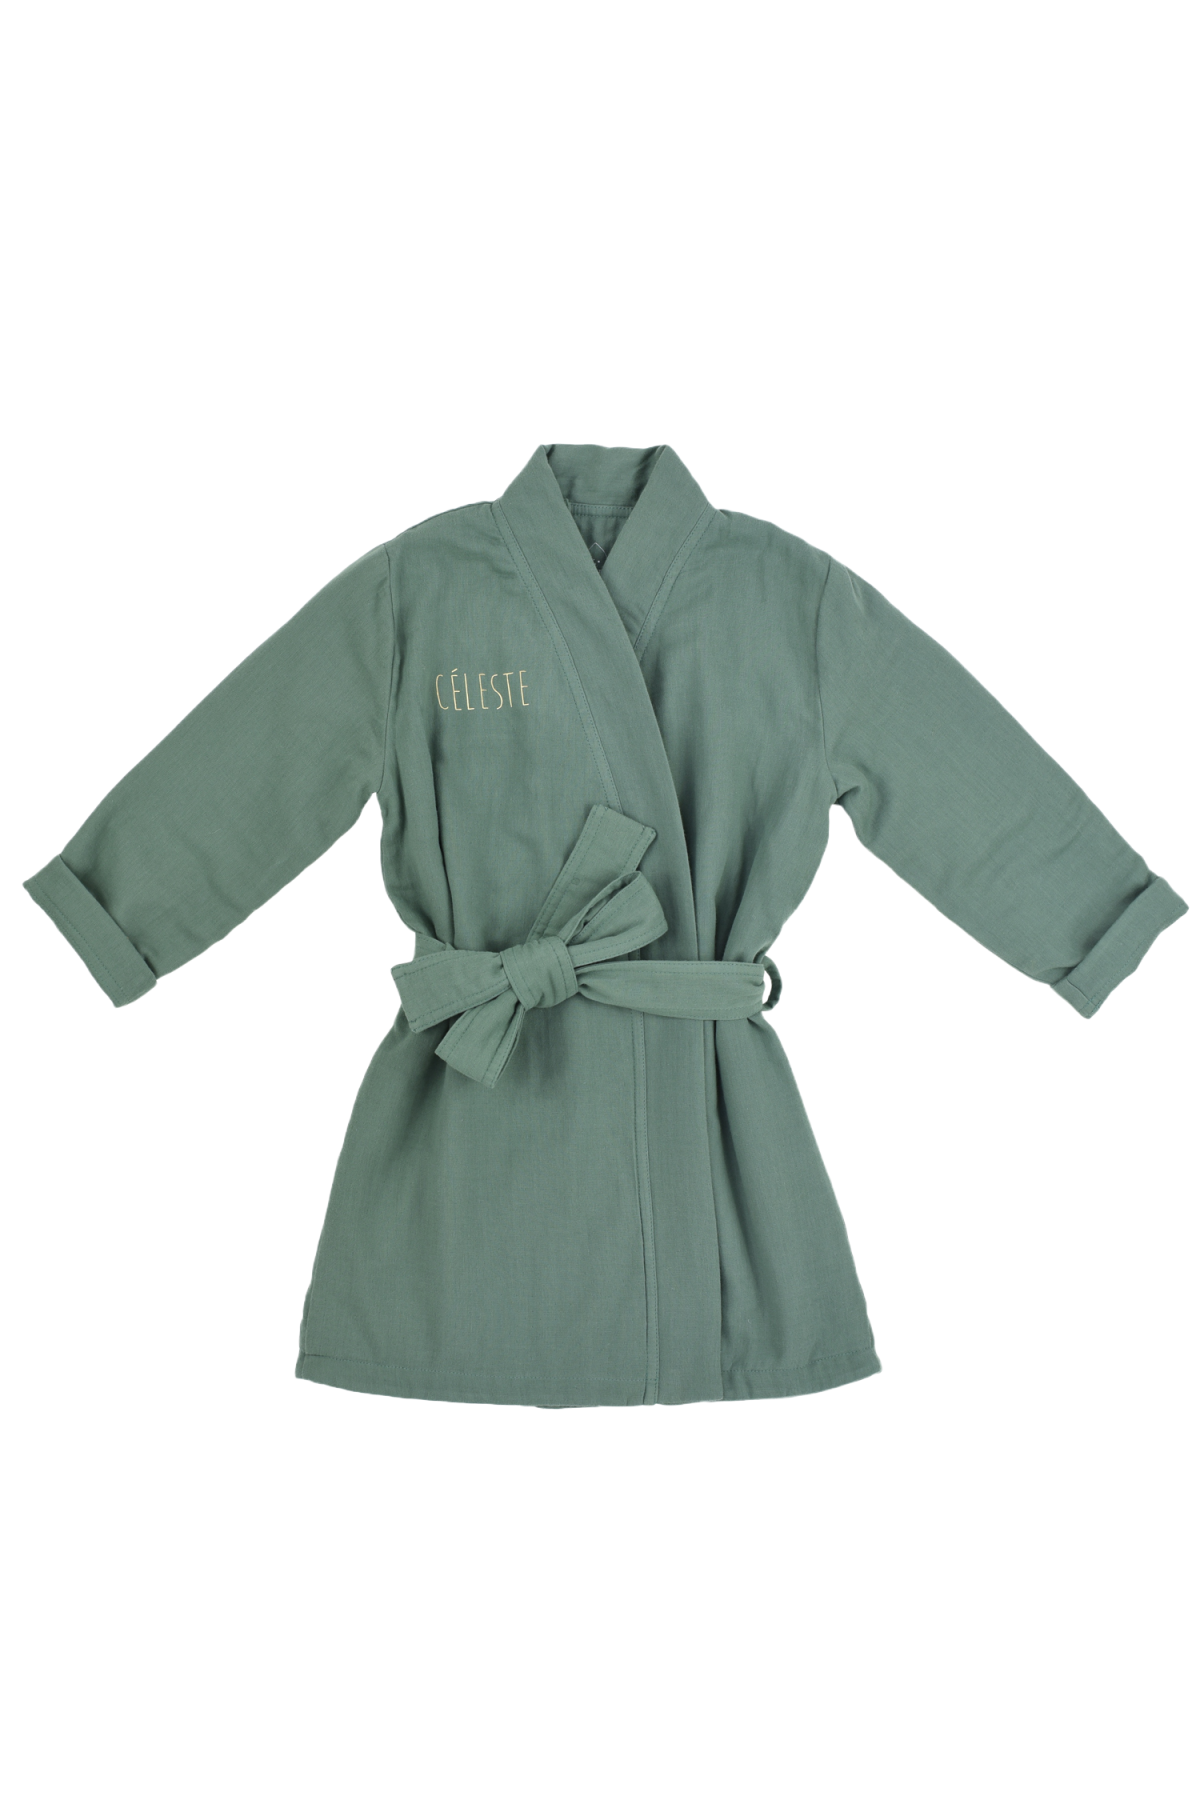 Personalized dressing gown